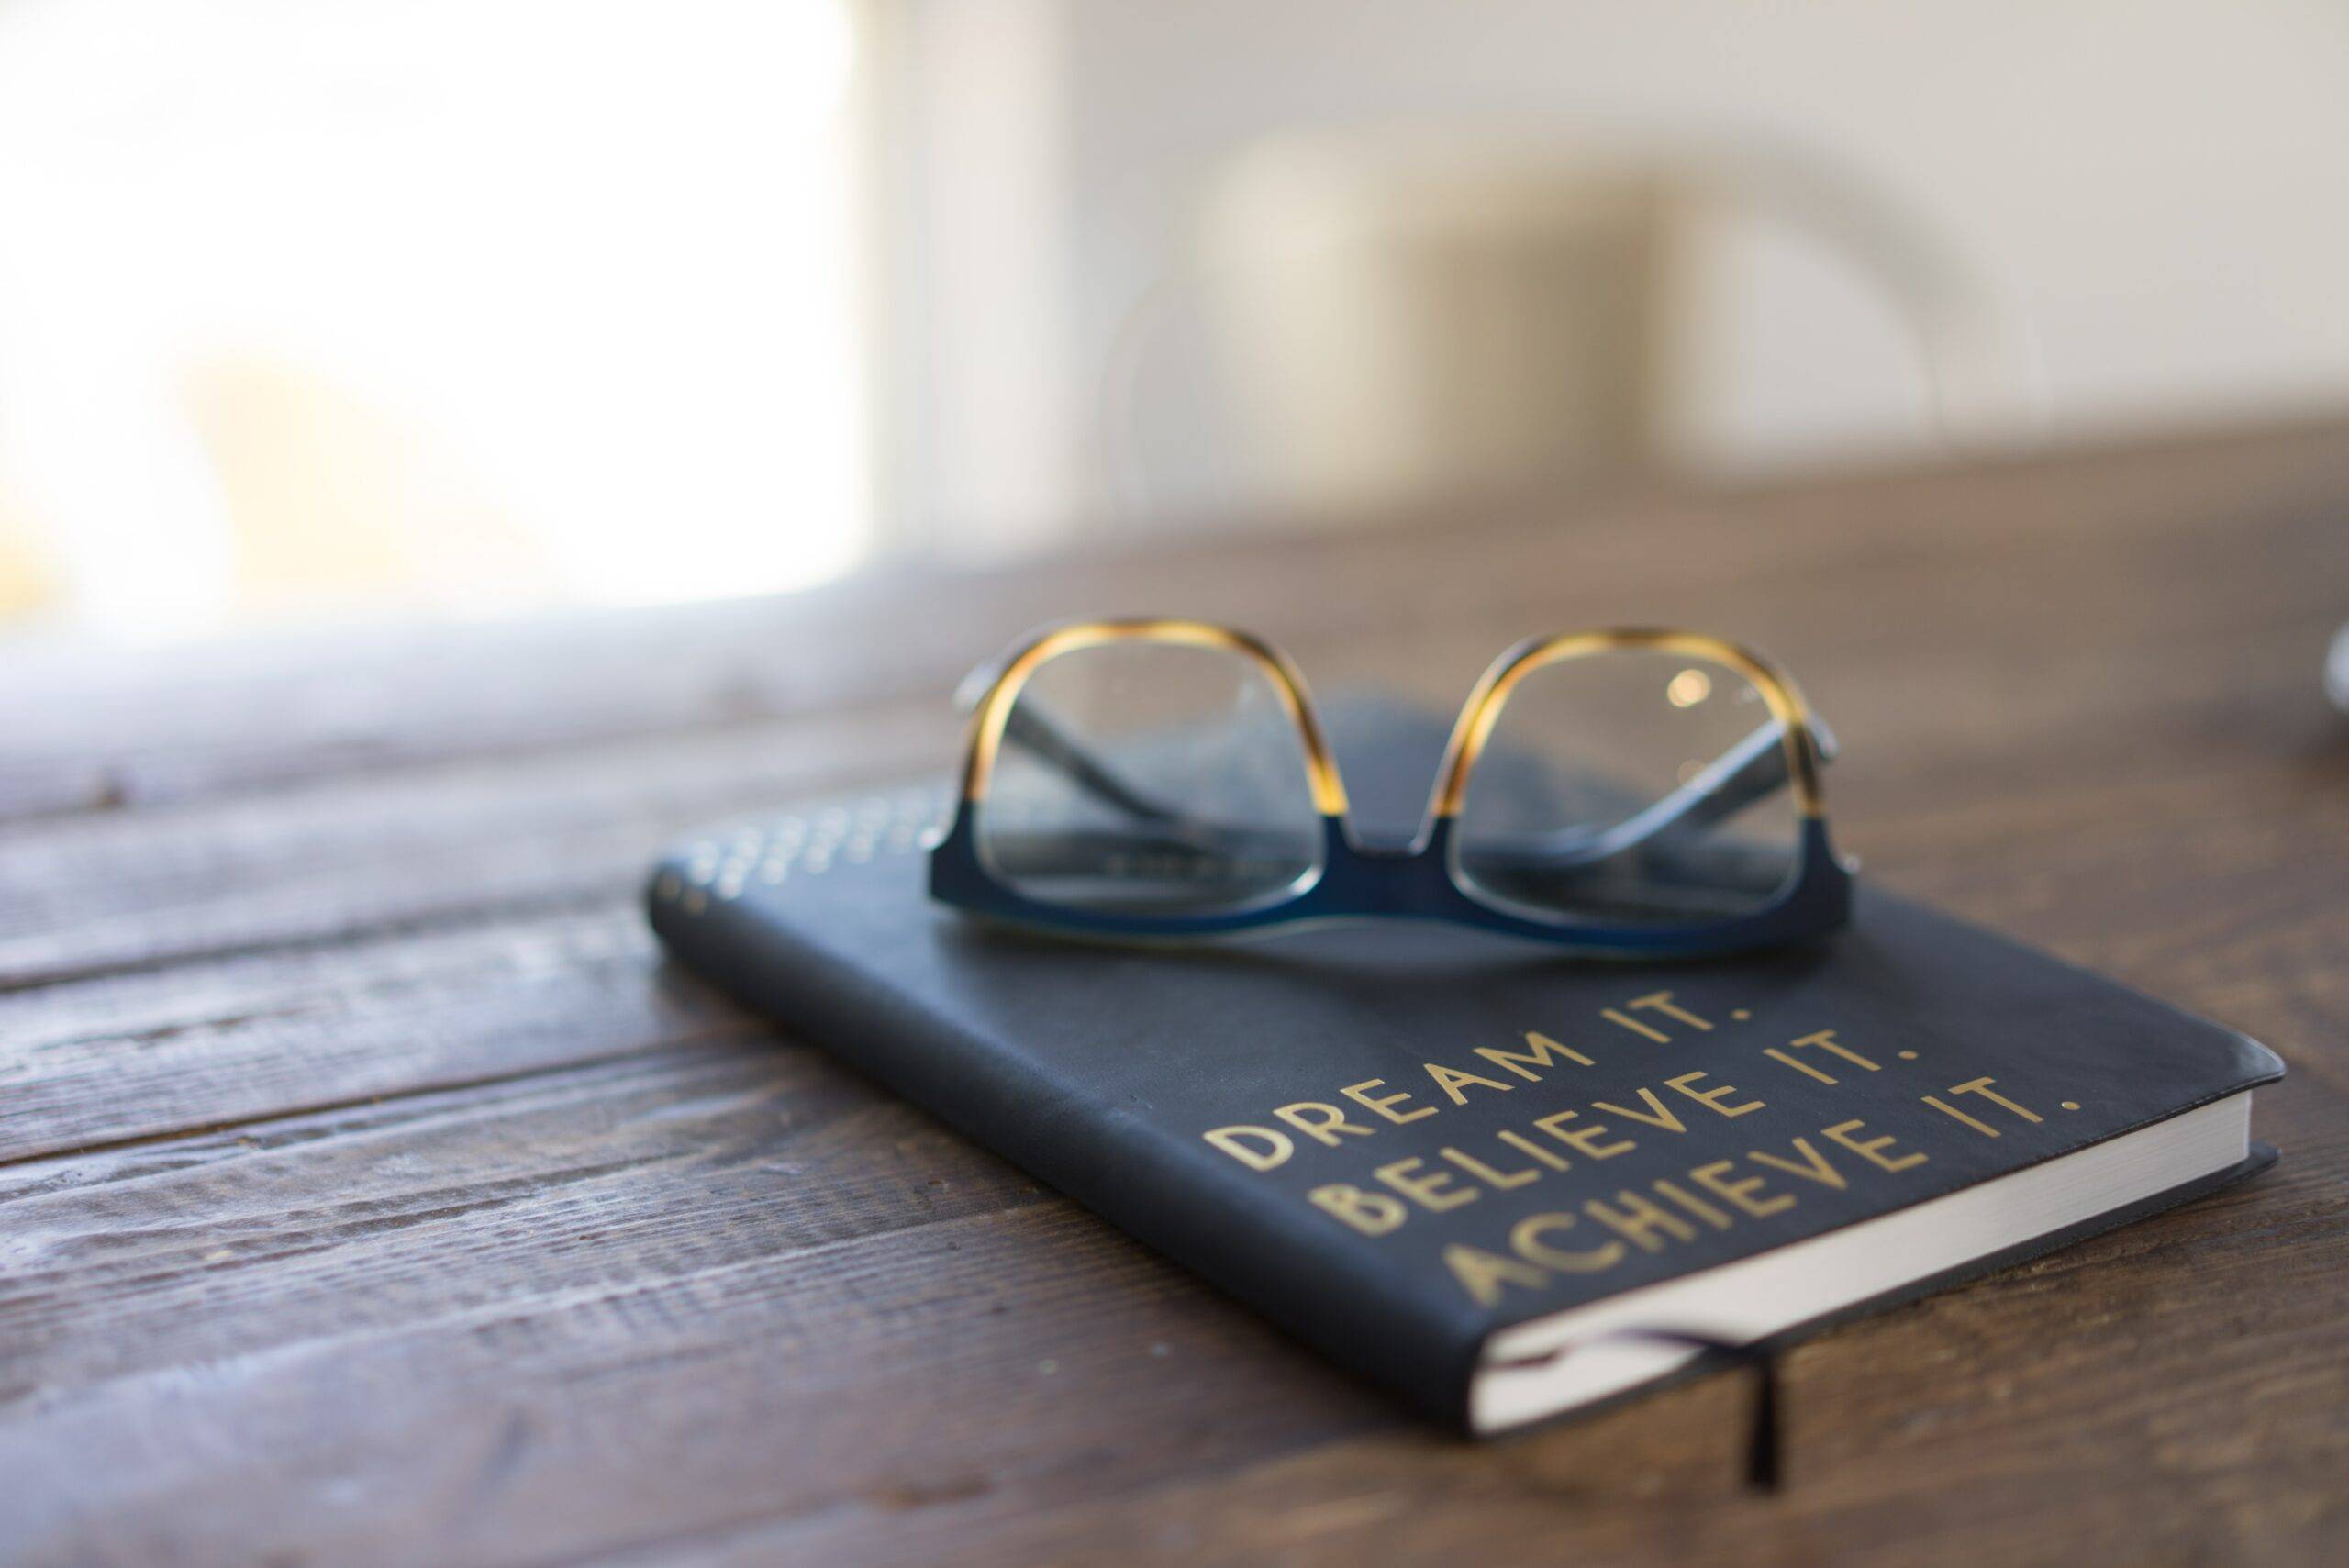 Pair of spectacles on top of a book